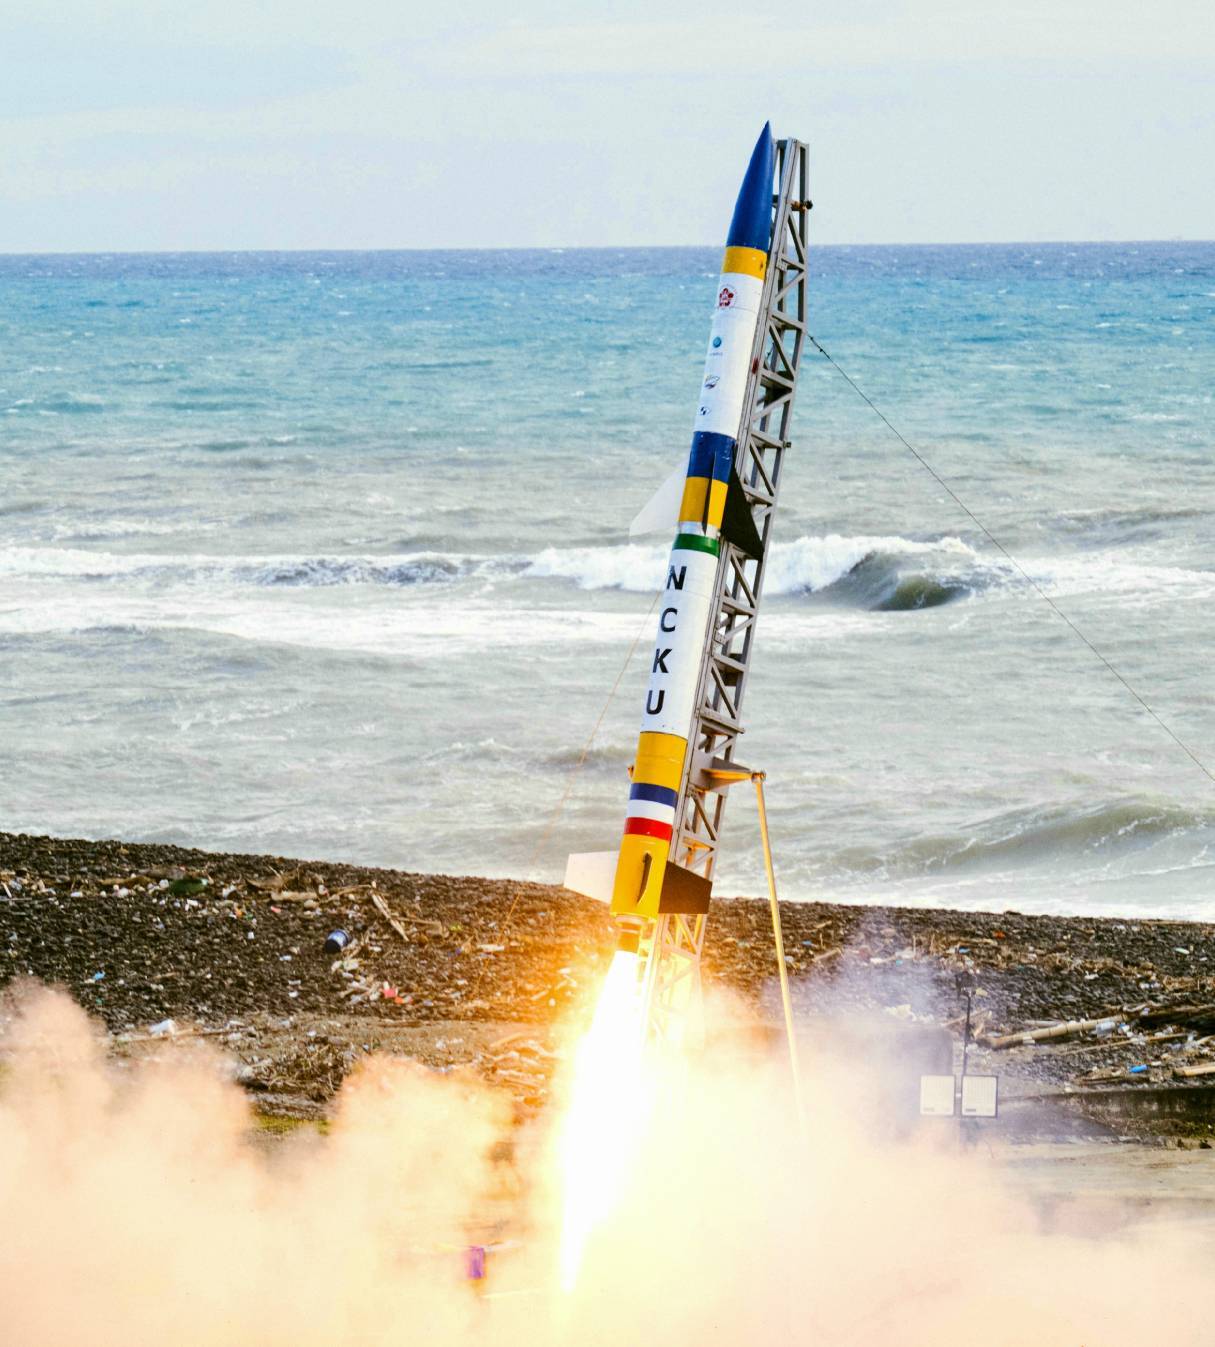 NCKU successfully launched a two-section hybrid rocket on November 8 at Pingtung County, Taiwan